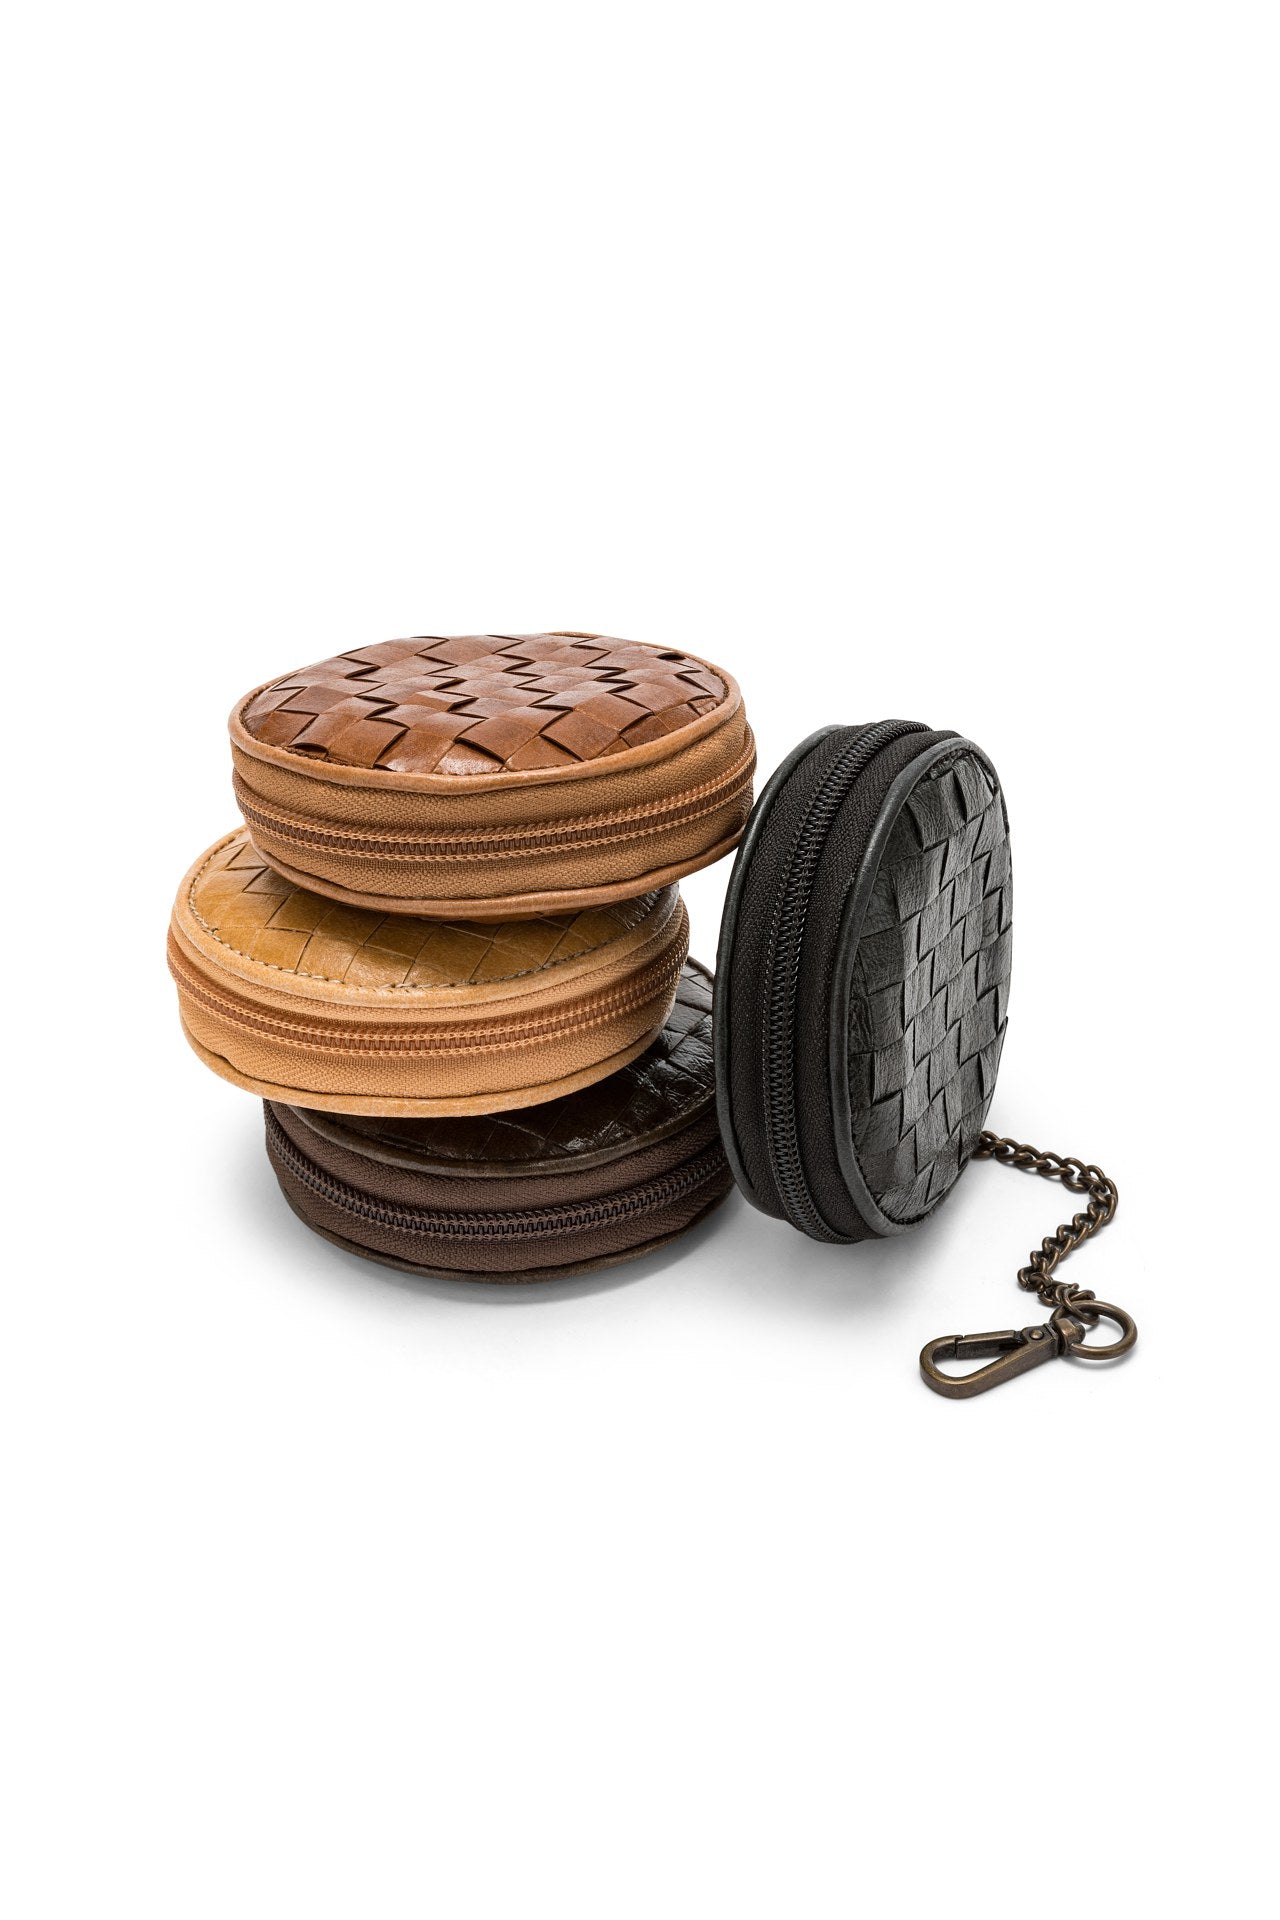 A set of woven washable paper coin purses is shown stacked in chocolate brown, pale tan and medium brown. A black washable paper woven coin purse sits on its side at right, with an antique brass chain and hook attachment closure.